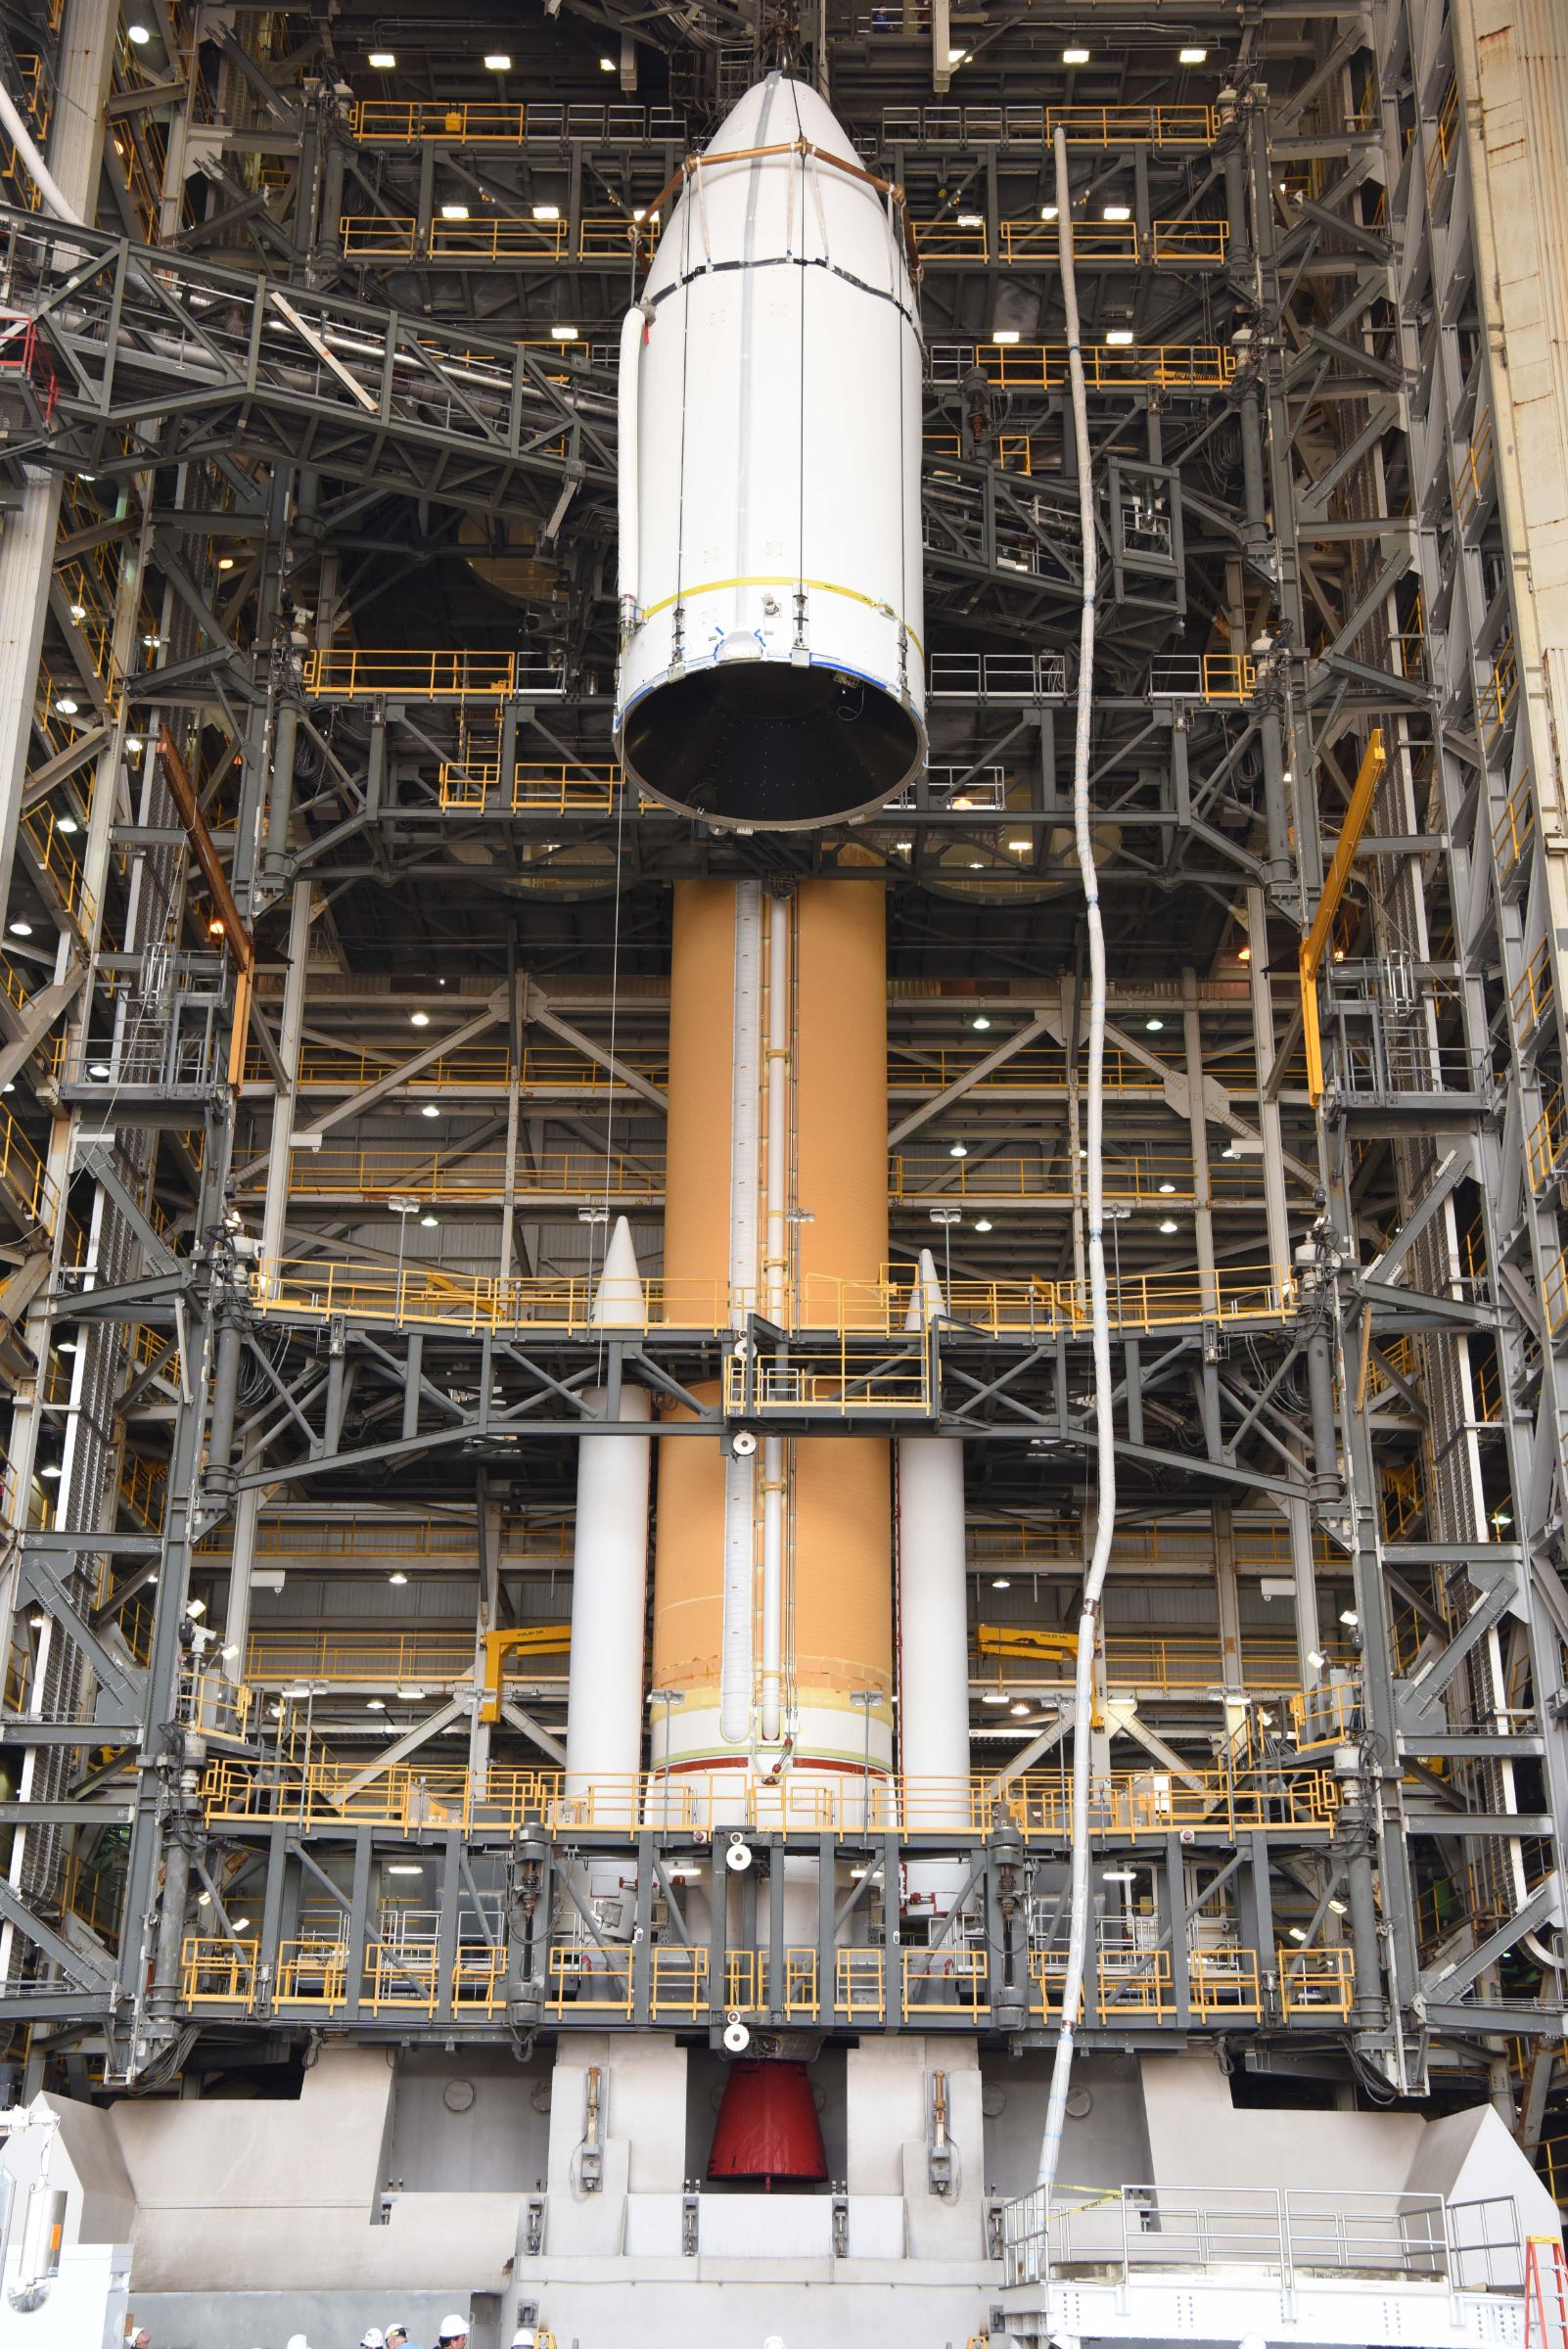 Photos Classified NRO Satellite Installed atop Delta IV Rocket NROL47 Spaceflight101